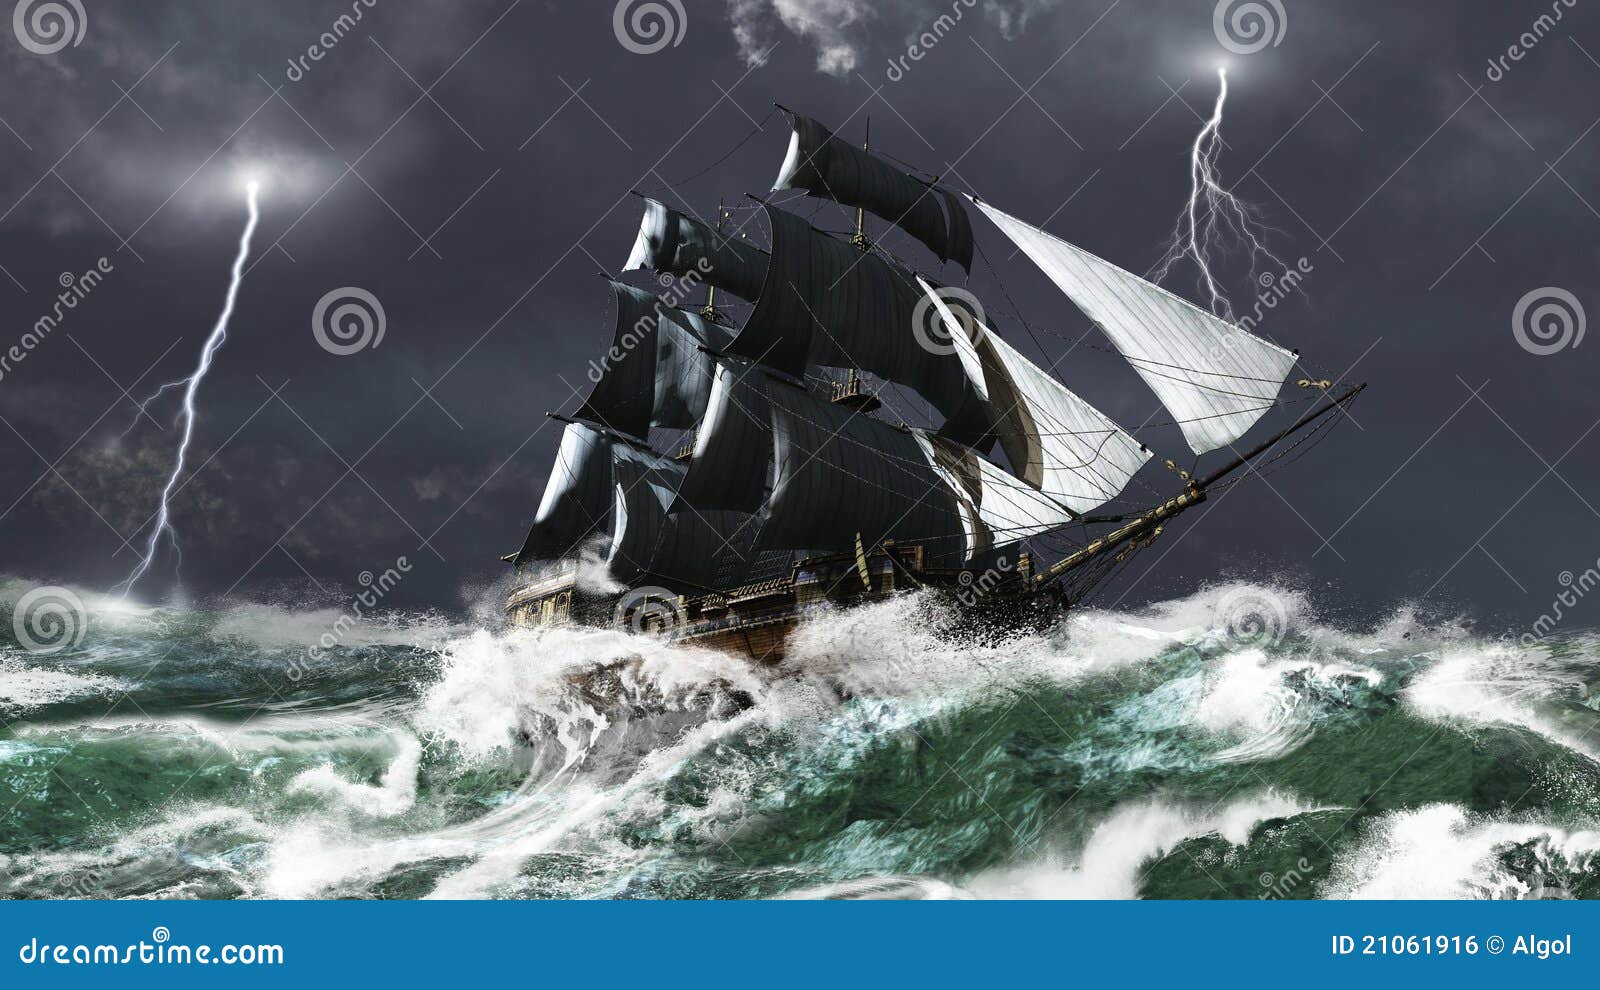 clipart ship in storm - photo #22